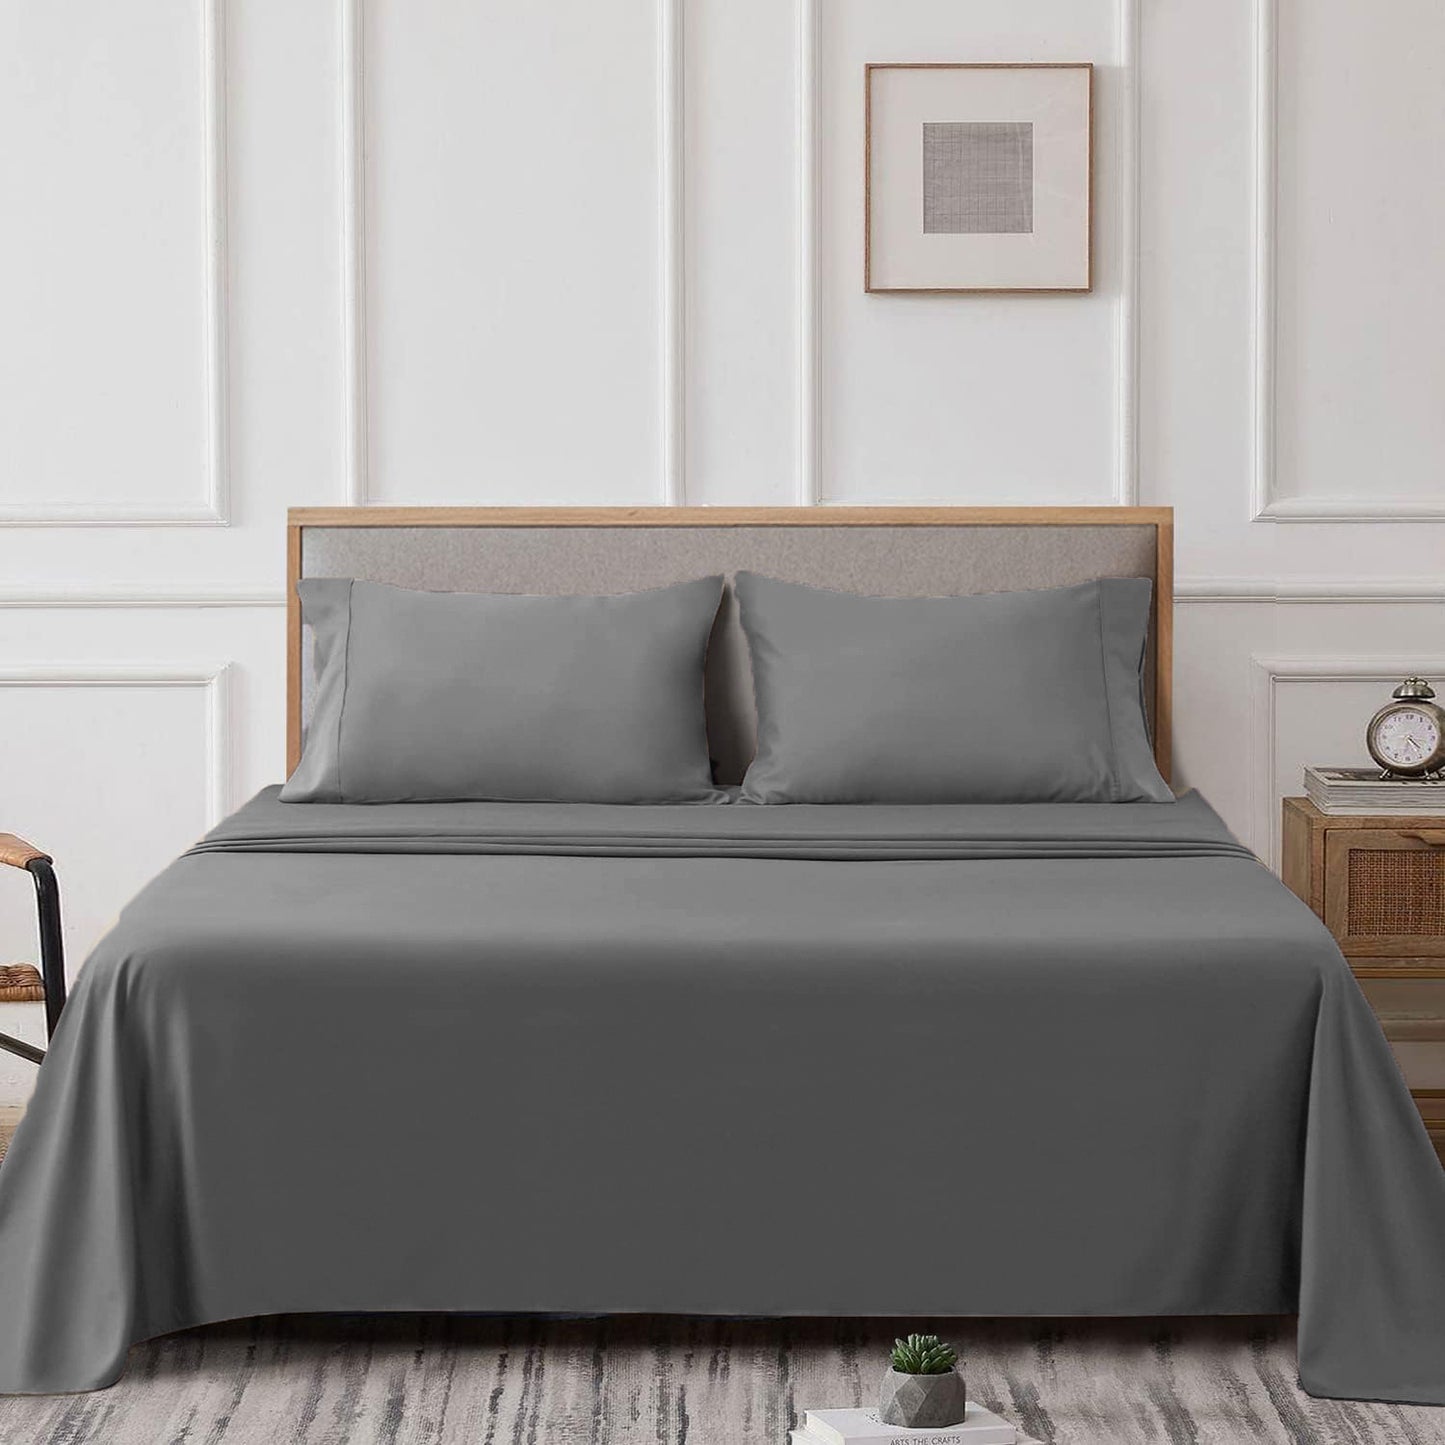 AmigoZone Flat Sheet - Soft Brushed Microfiber Easy Care Top Sheet - Long Lasting Fade Resistant